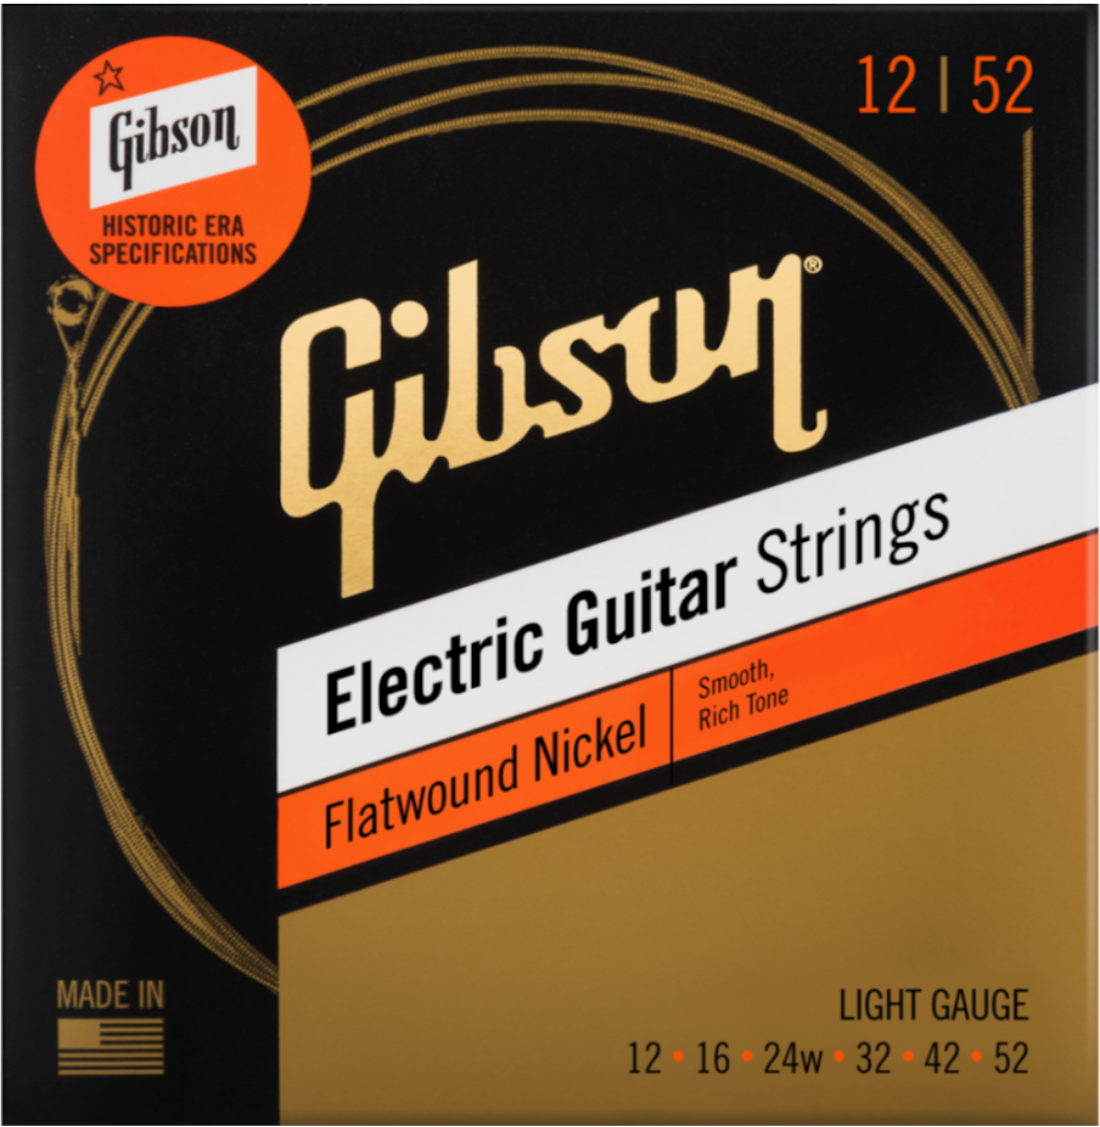 11 - 52 Flatwound Electric Guitar Strings Light